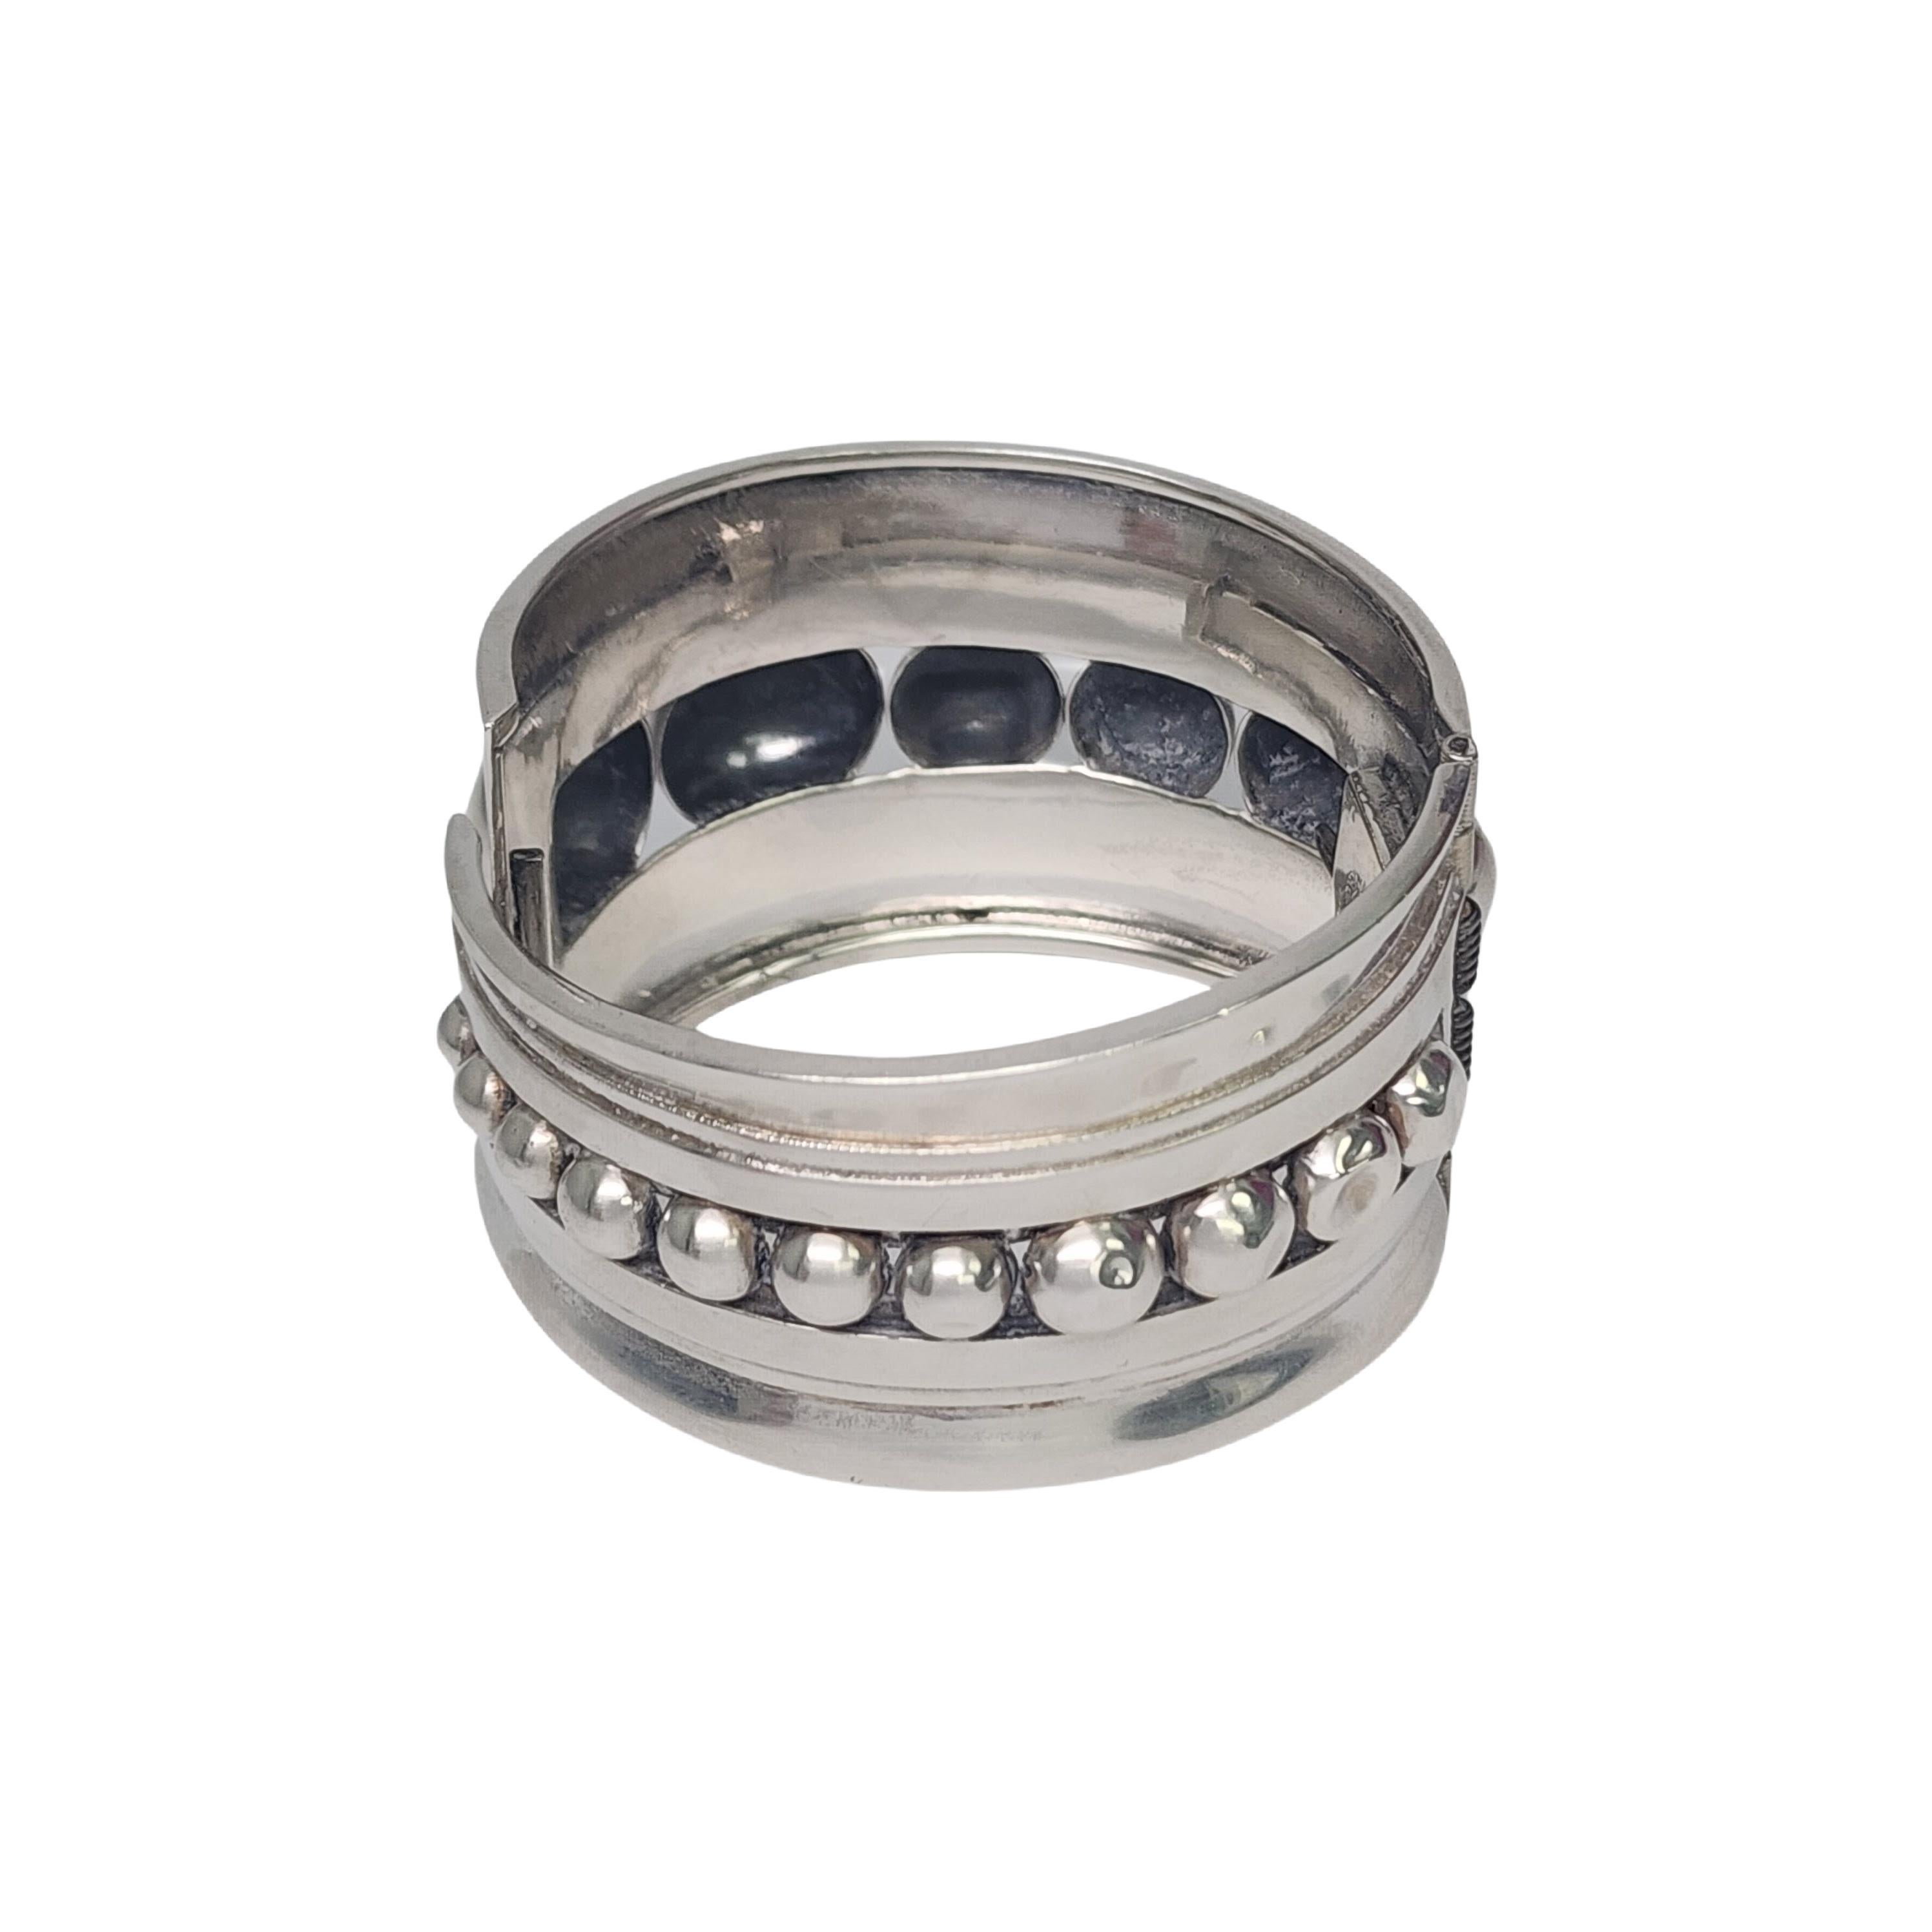 Sterling silver clamper bracelet by Alfredo Villasana of Mexico.

Wide and substantial hinged clamper bracelet with a graduated bead design. 

Weighs approx 74.0g, 47.6dwt

Measures approx 6 3/4